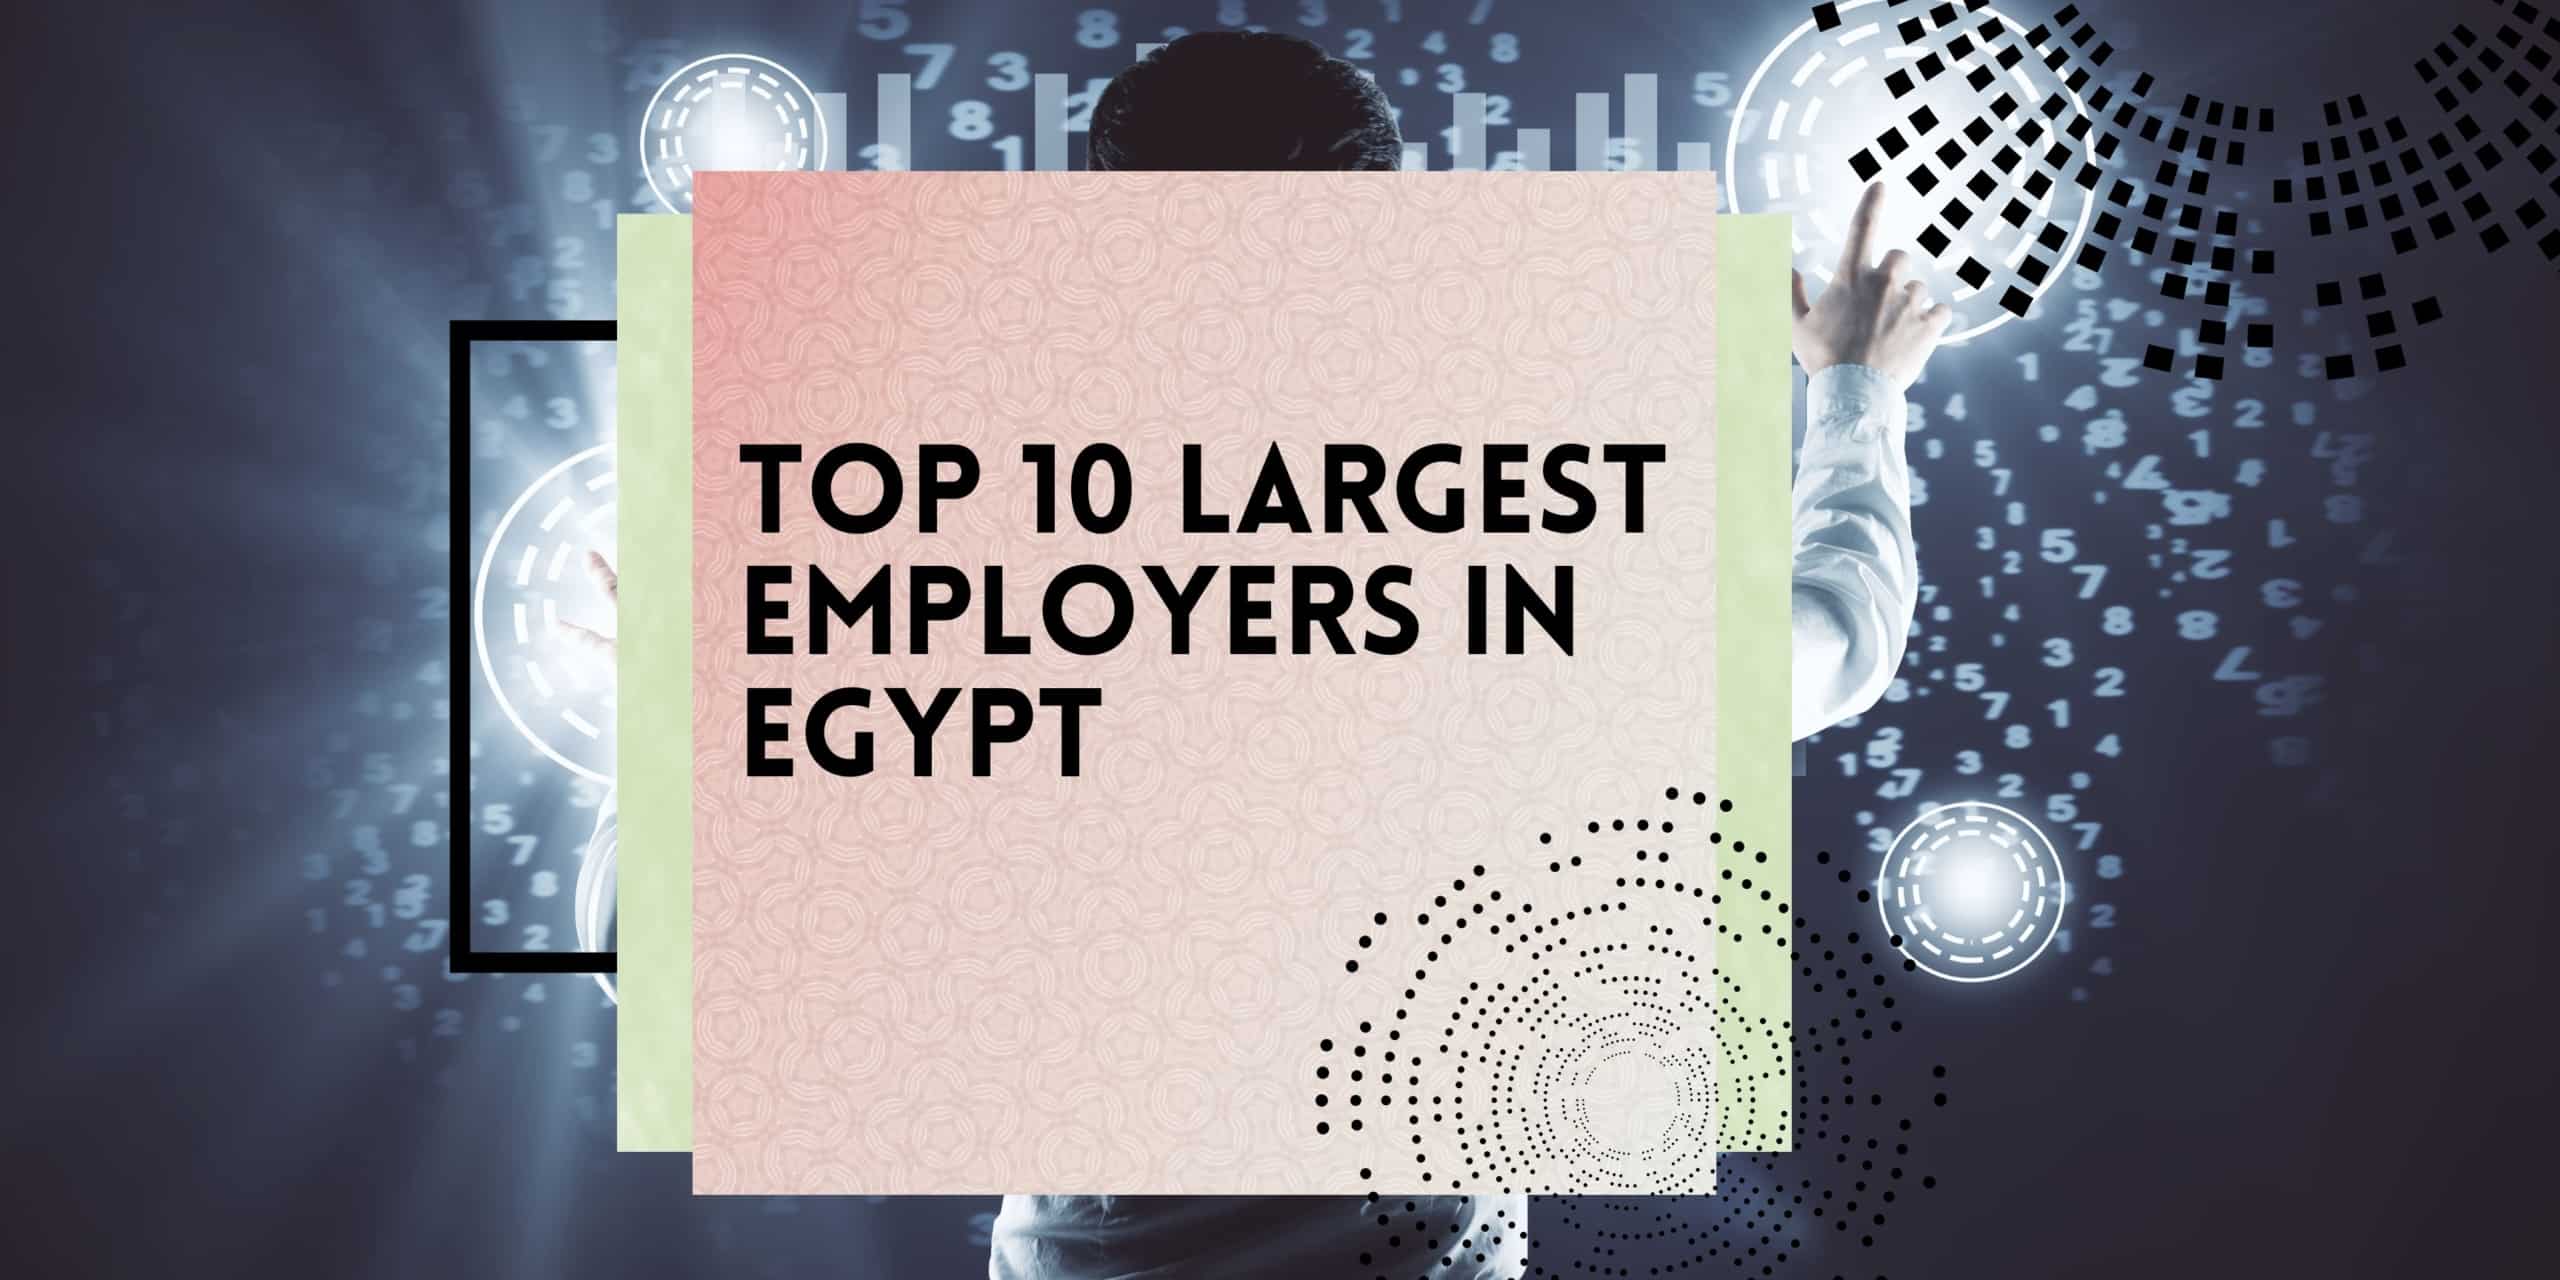 Top 10 Largest Employers in Egypt